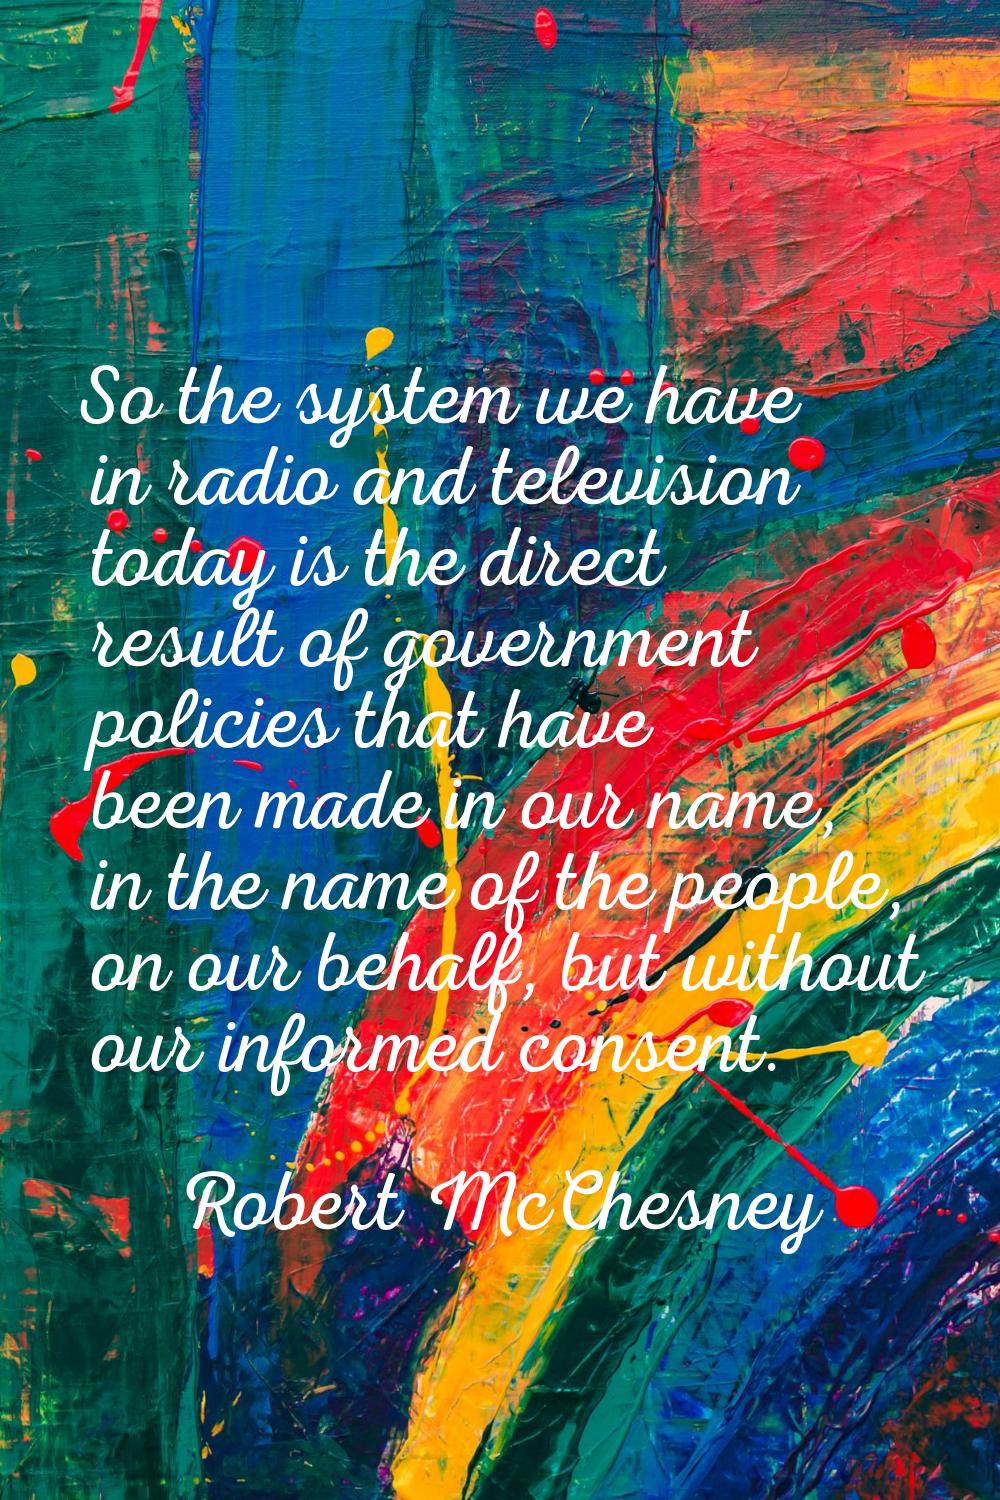 So the system we have in radio and television today is the direct result of government policies tha